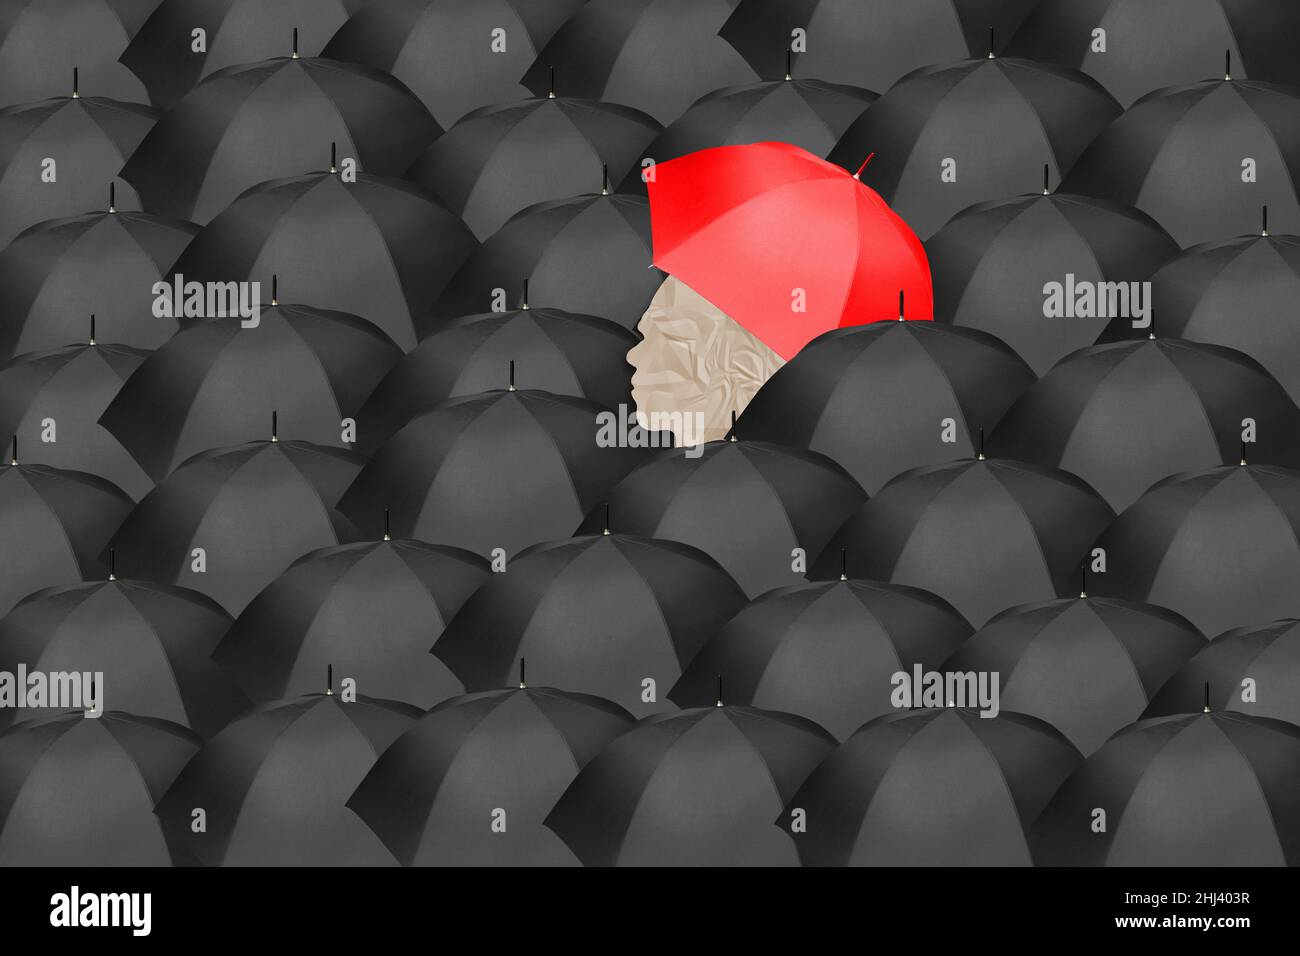 Sea of black umbrellas with one person holding a red umbrella in the center, symbolizing leadership, innovation, individuality, audacity, uniqueness. Stock Photo